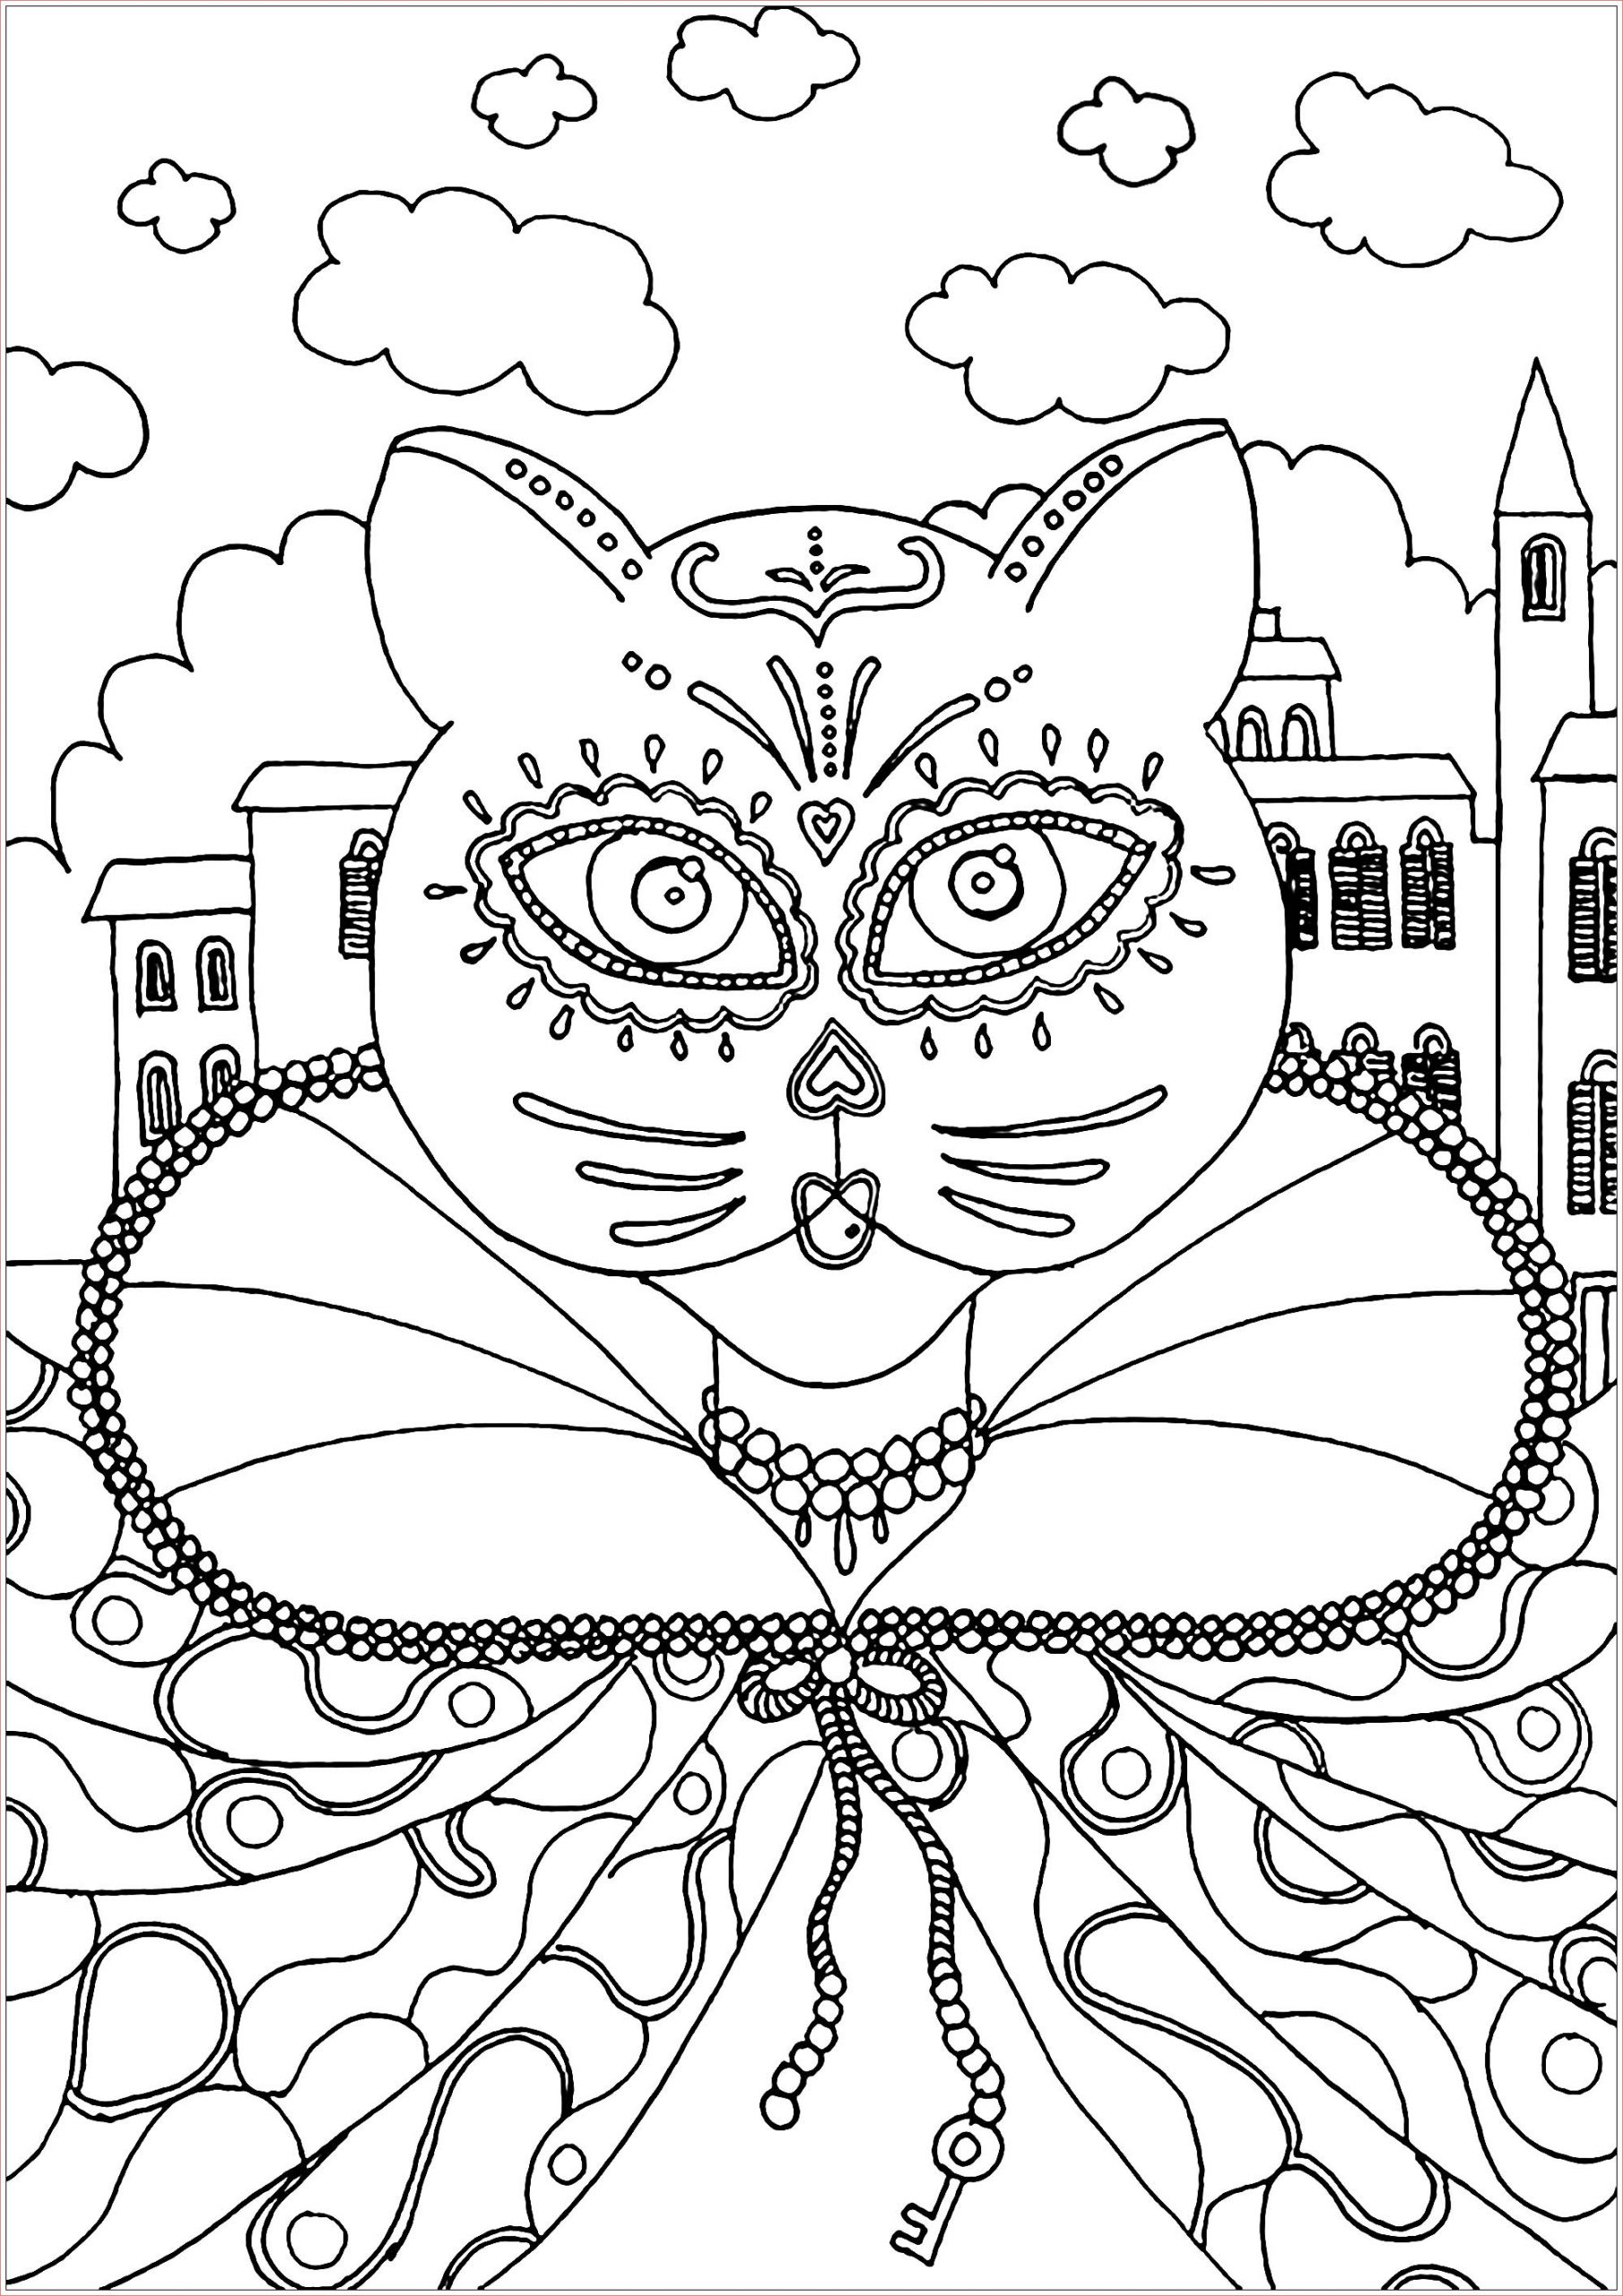 image=carnival coloring pages for children carnival 1